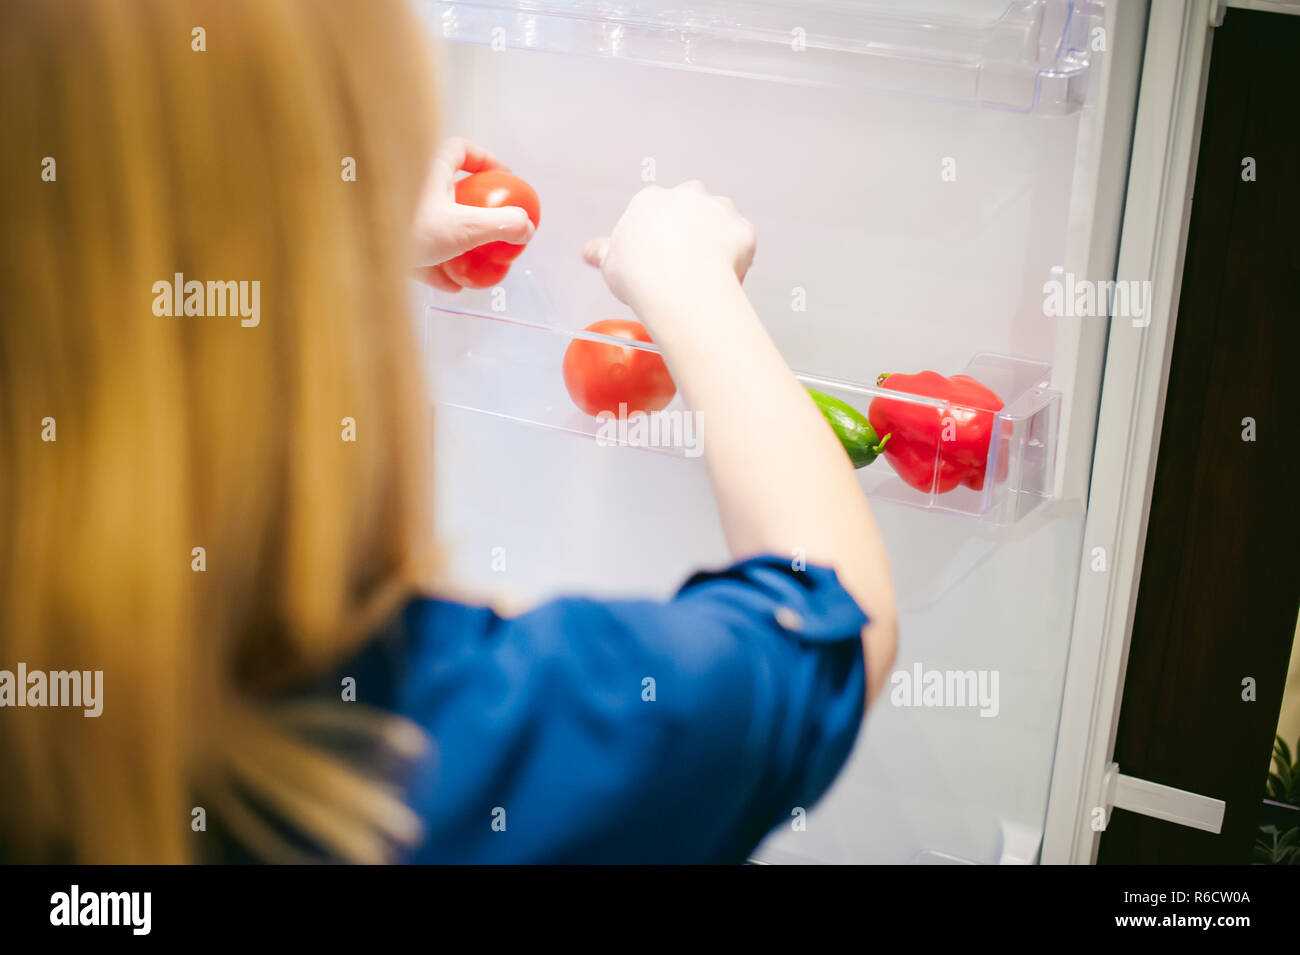 Housewives hand arranges purchased vegetables in the refrigerator Stock Photo